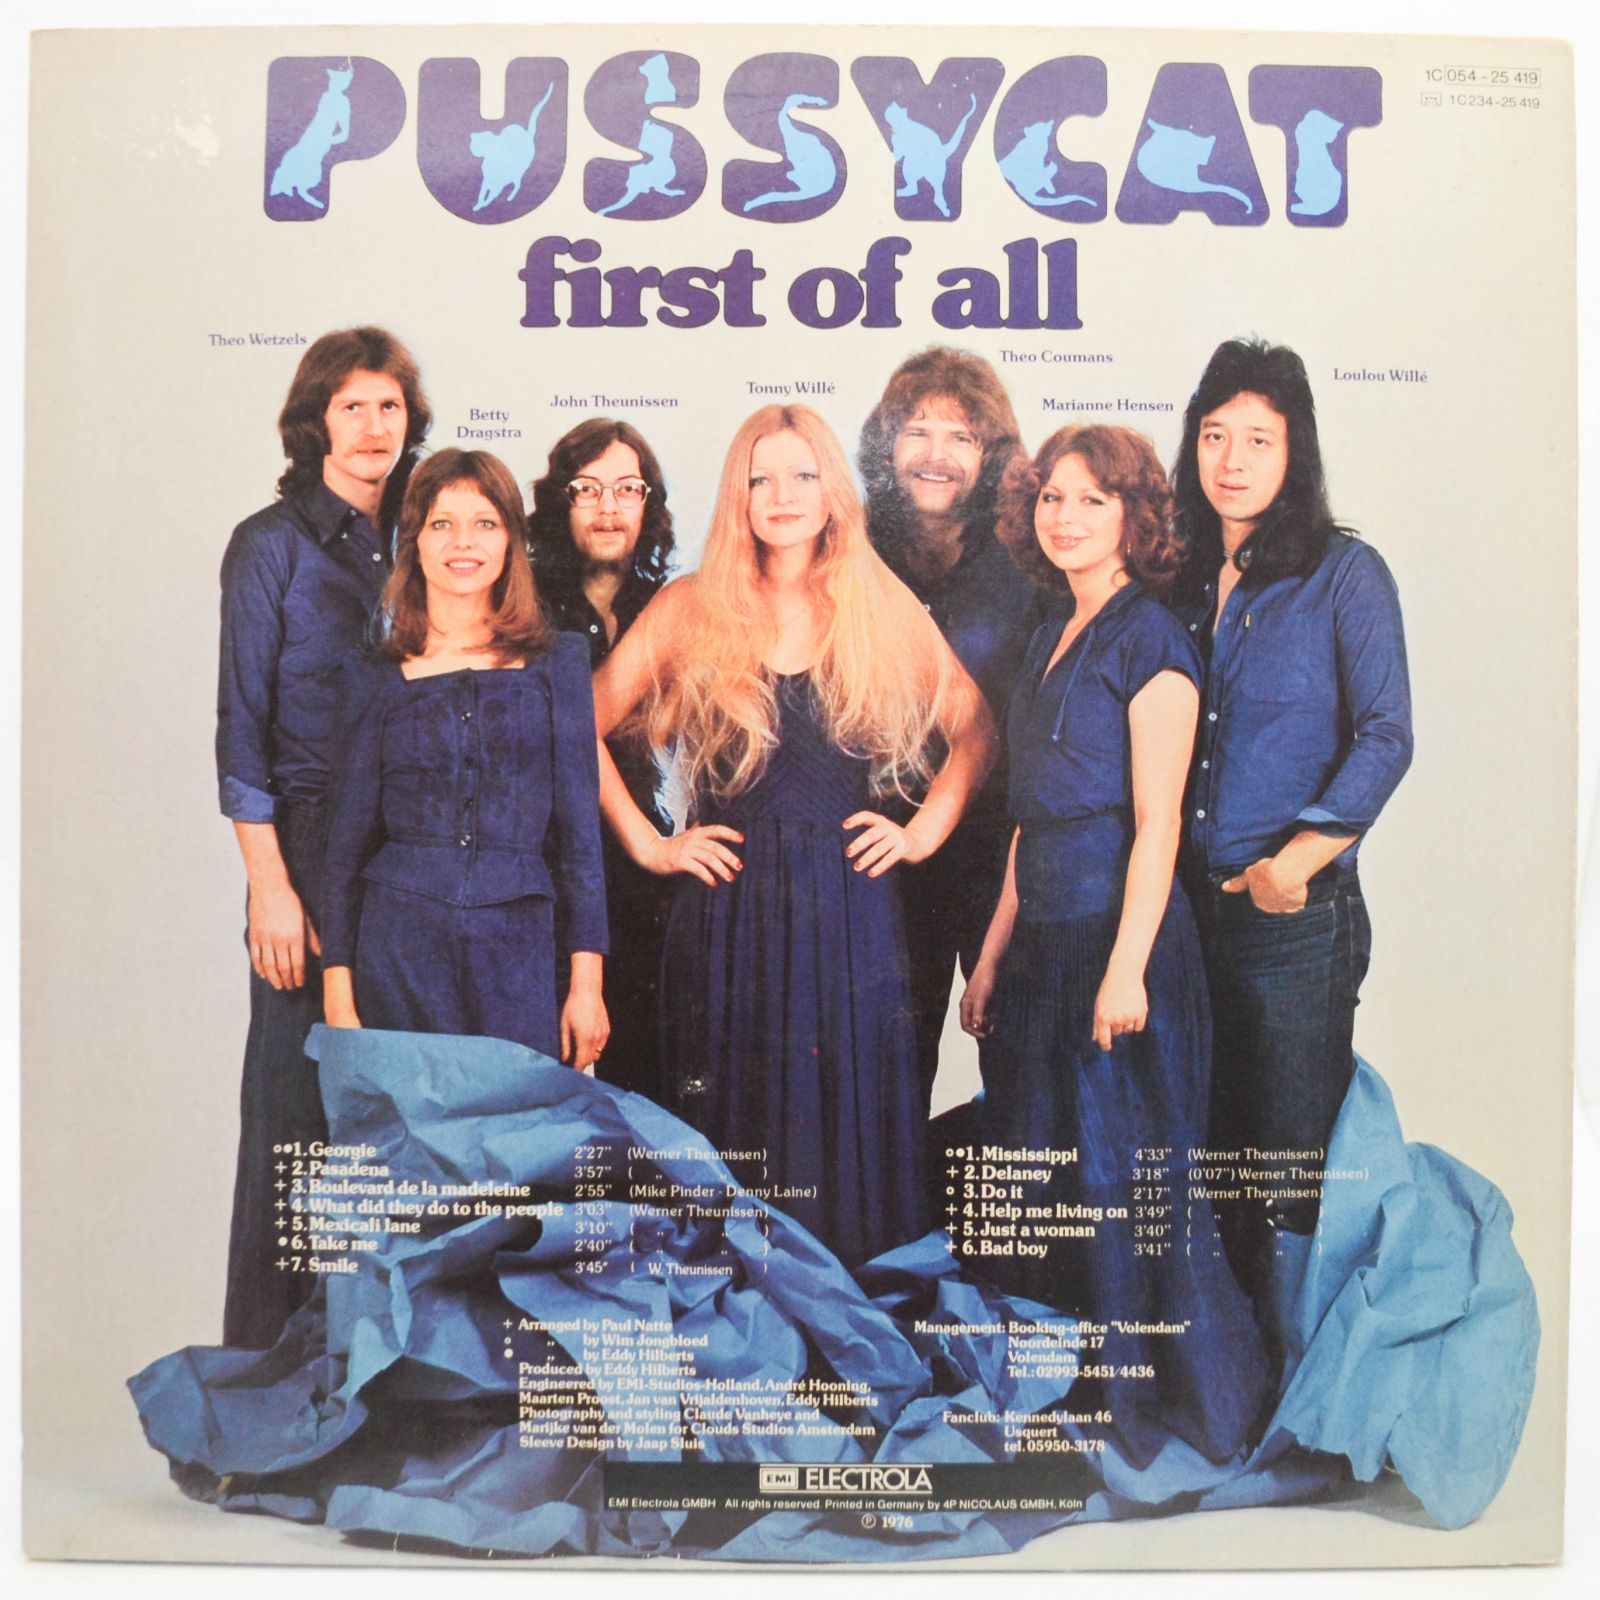 Pussycat — First Of All, 1976